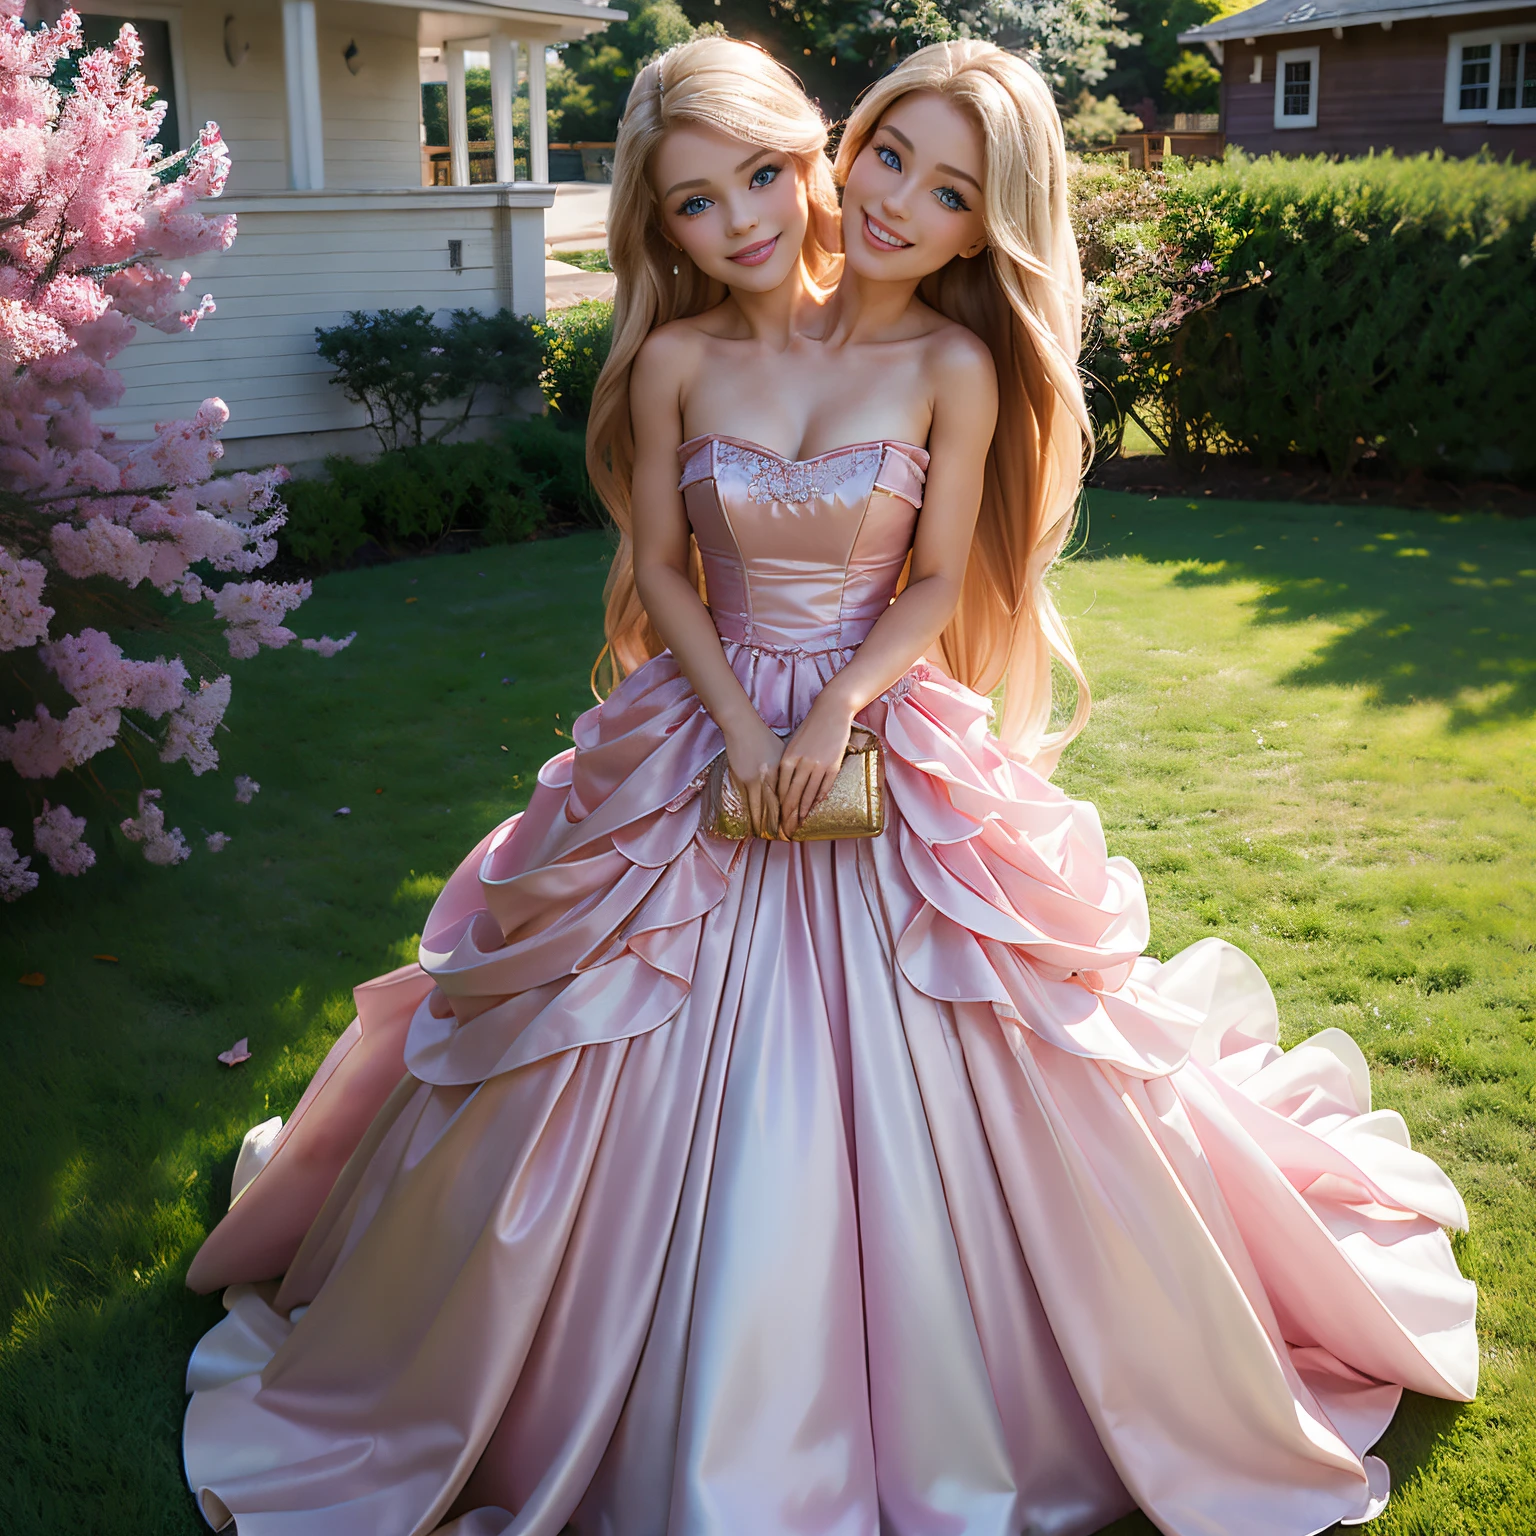 (masterpiece, best quality), best resolution, (2heads:1.5), 1girl, barbie, blond hair, long hair, different hair styles, floor length hair, blue eyes, smiling, mouth open, different facial expressions, mouth closed, pink dress, holding a handbag, front yard of pink house, suburban